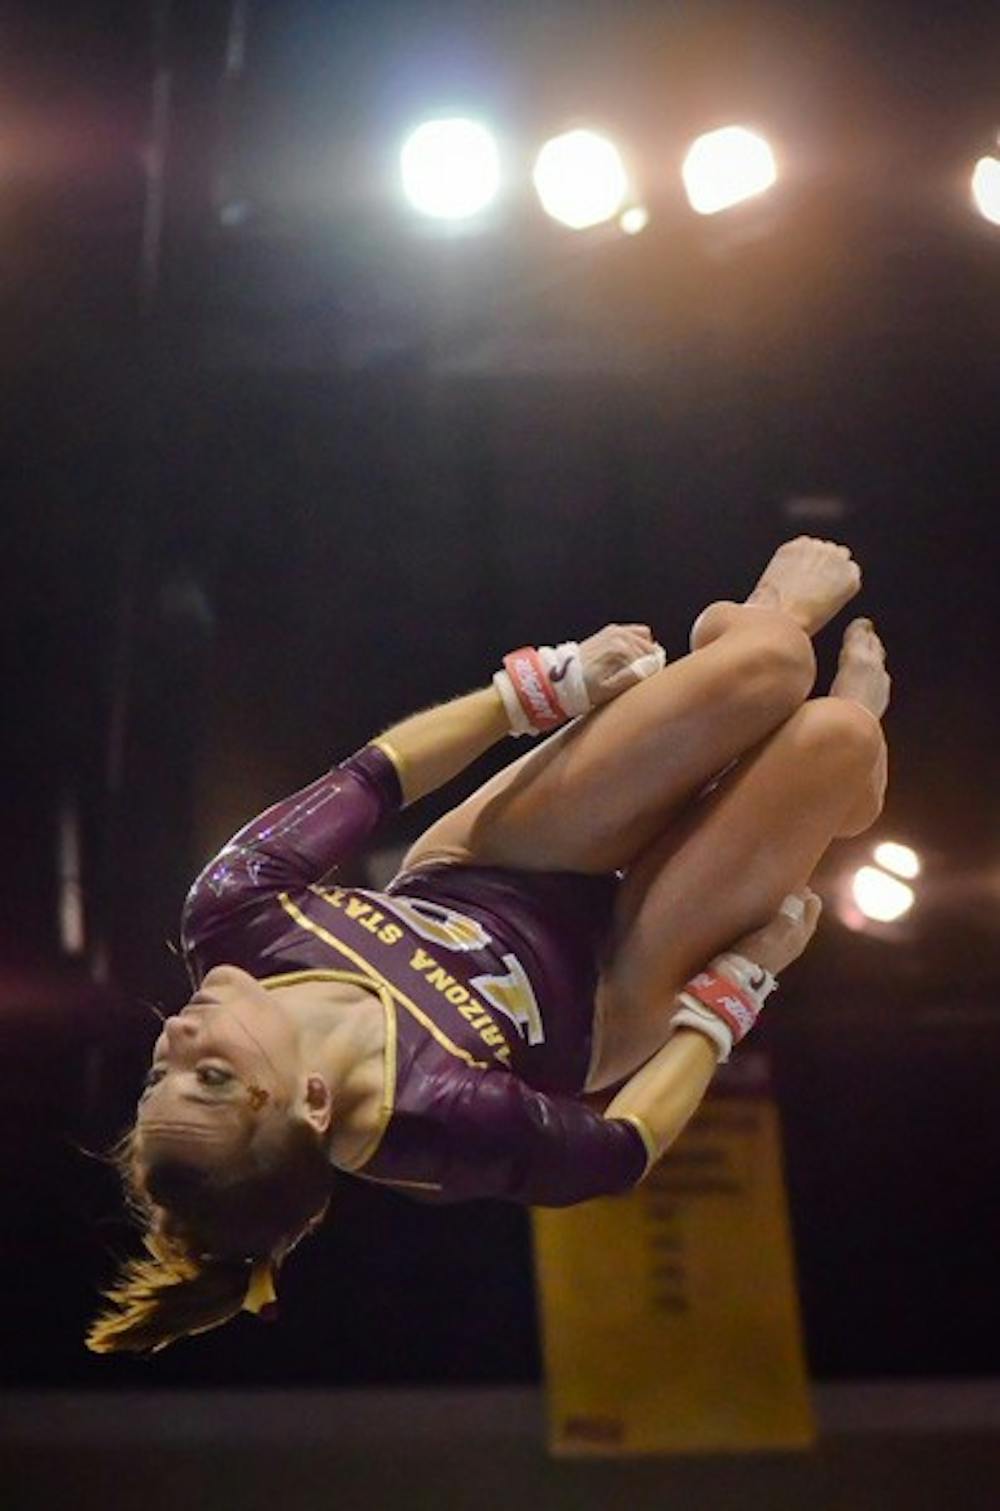 A step back: ASU freshman Samantha Seaman flies through the air during her routine on the uneven bars during the Sun Devils’ Feb. 6 dual with Oregon State. ASU posted their lowest score since Jan. 28 during their loss to No. 2 Stanford on Sunday. (Photo by Aaron Lavinsky)